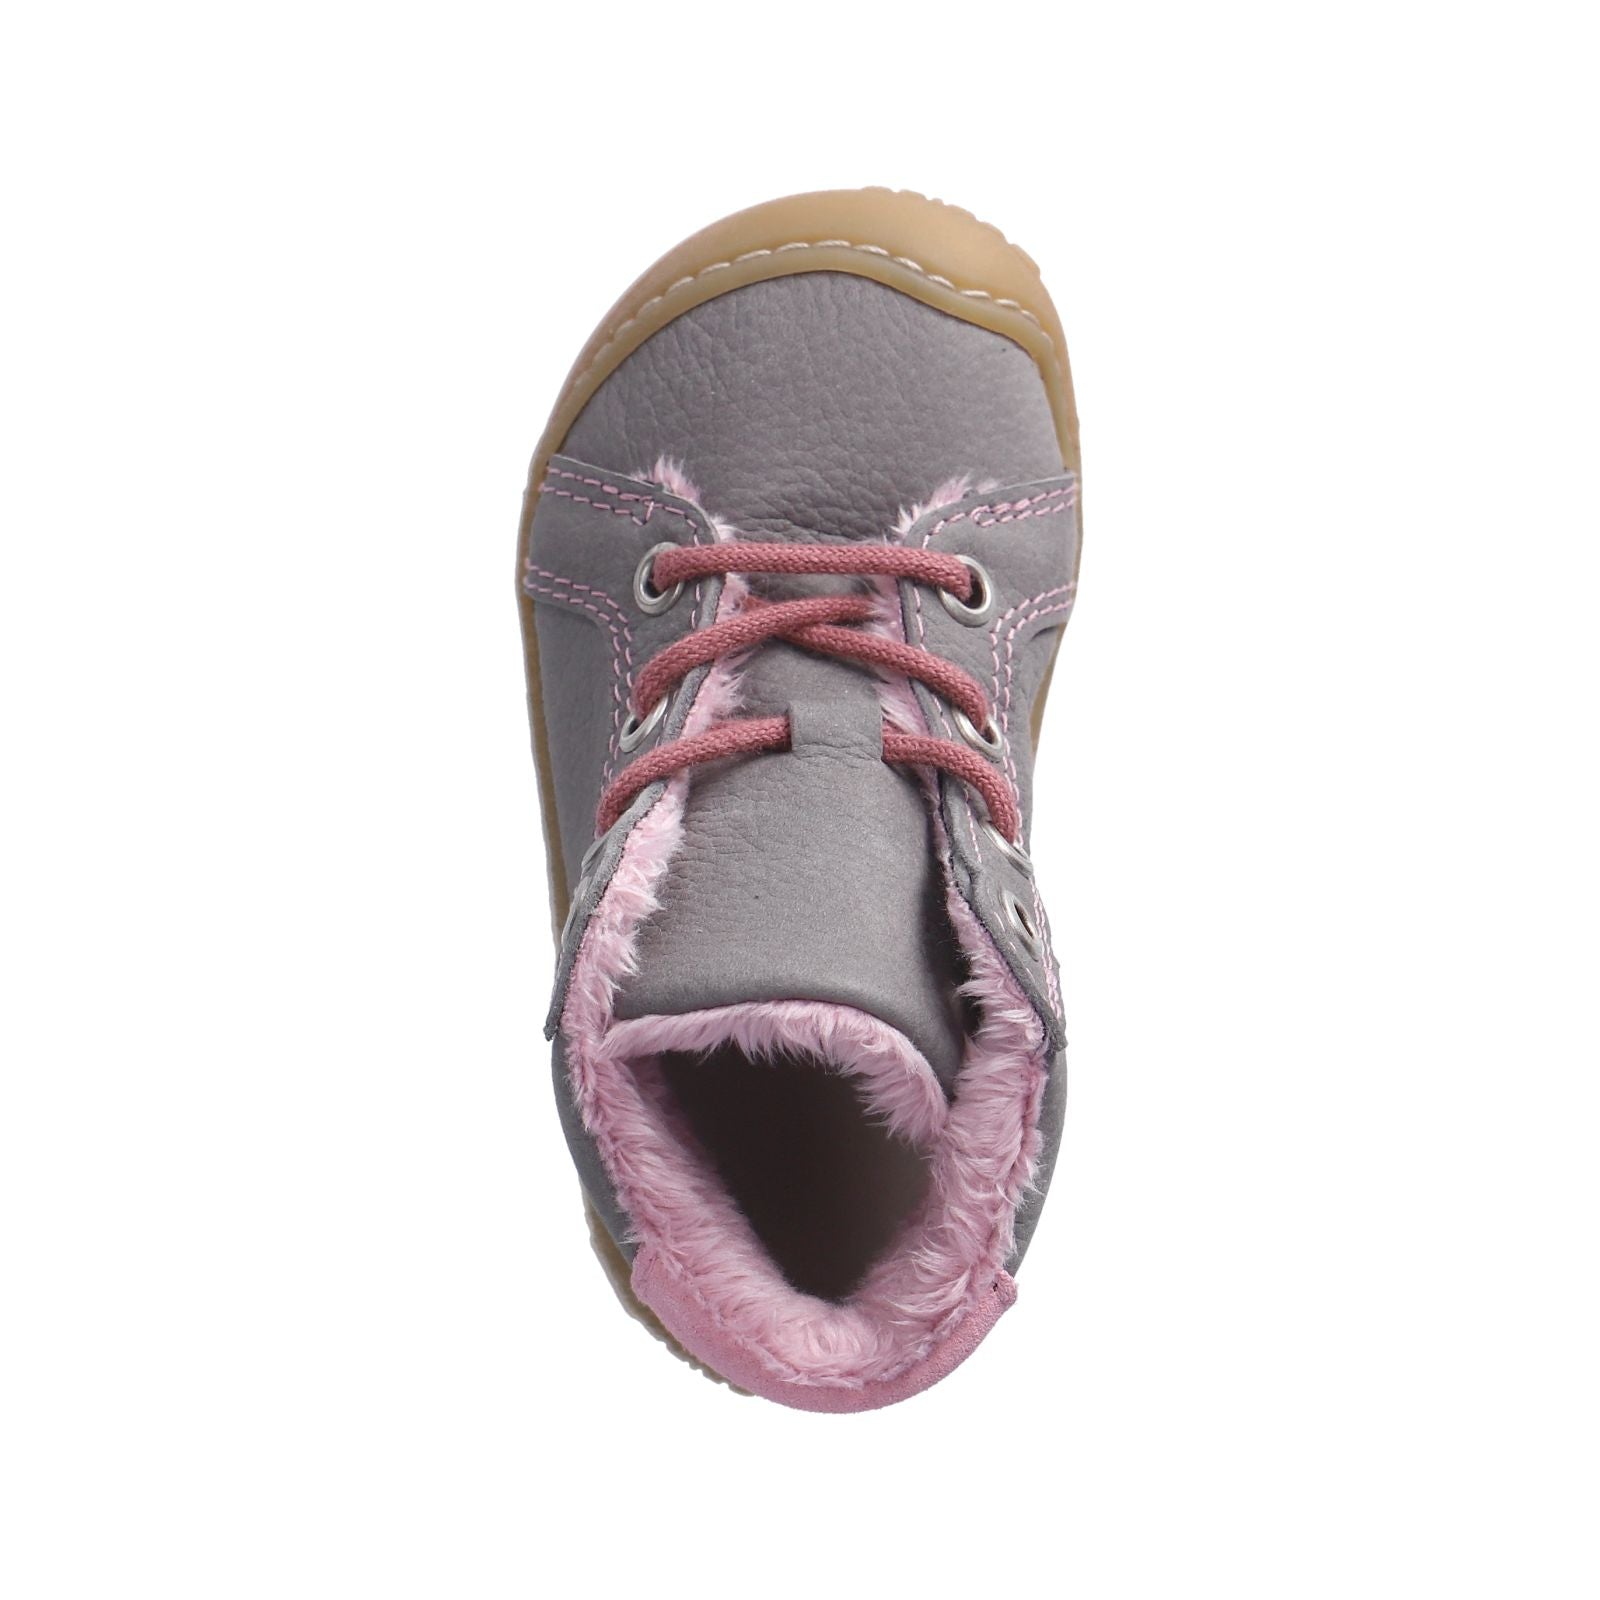 A girls ankle boot by Ricosta, style Georgie, in grey and pink leather with lace fastening. Above view.